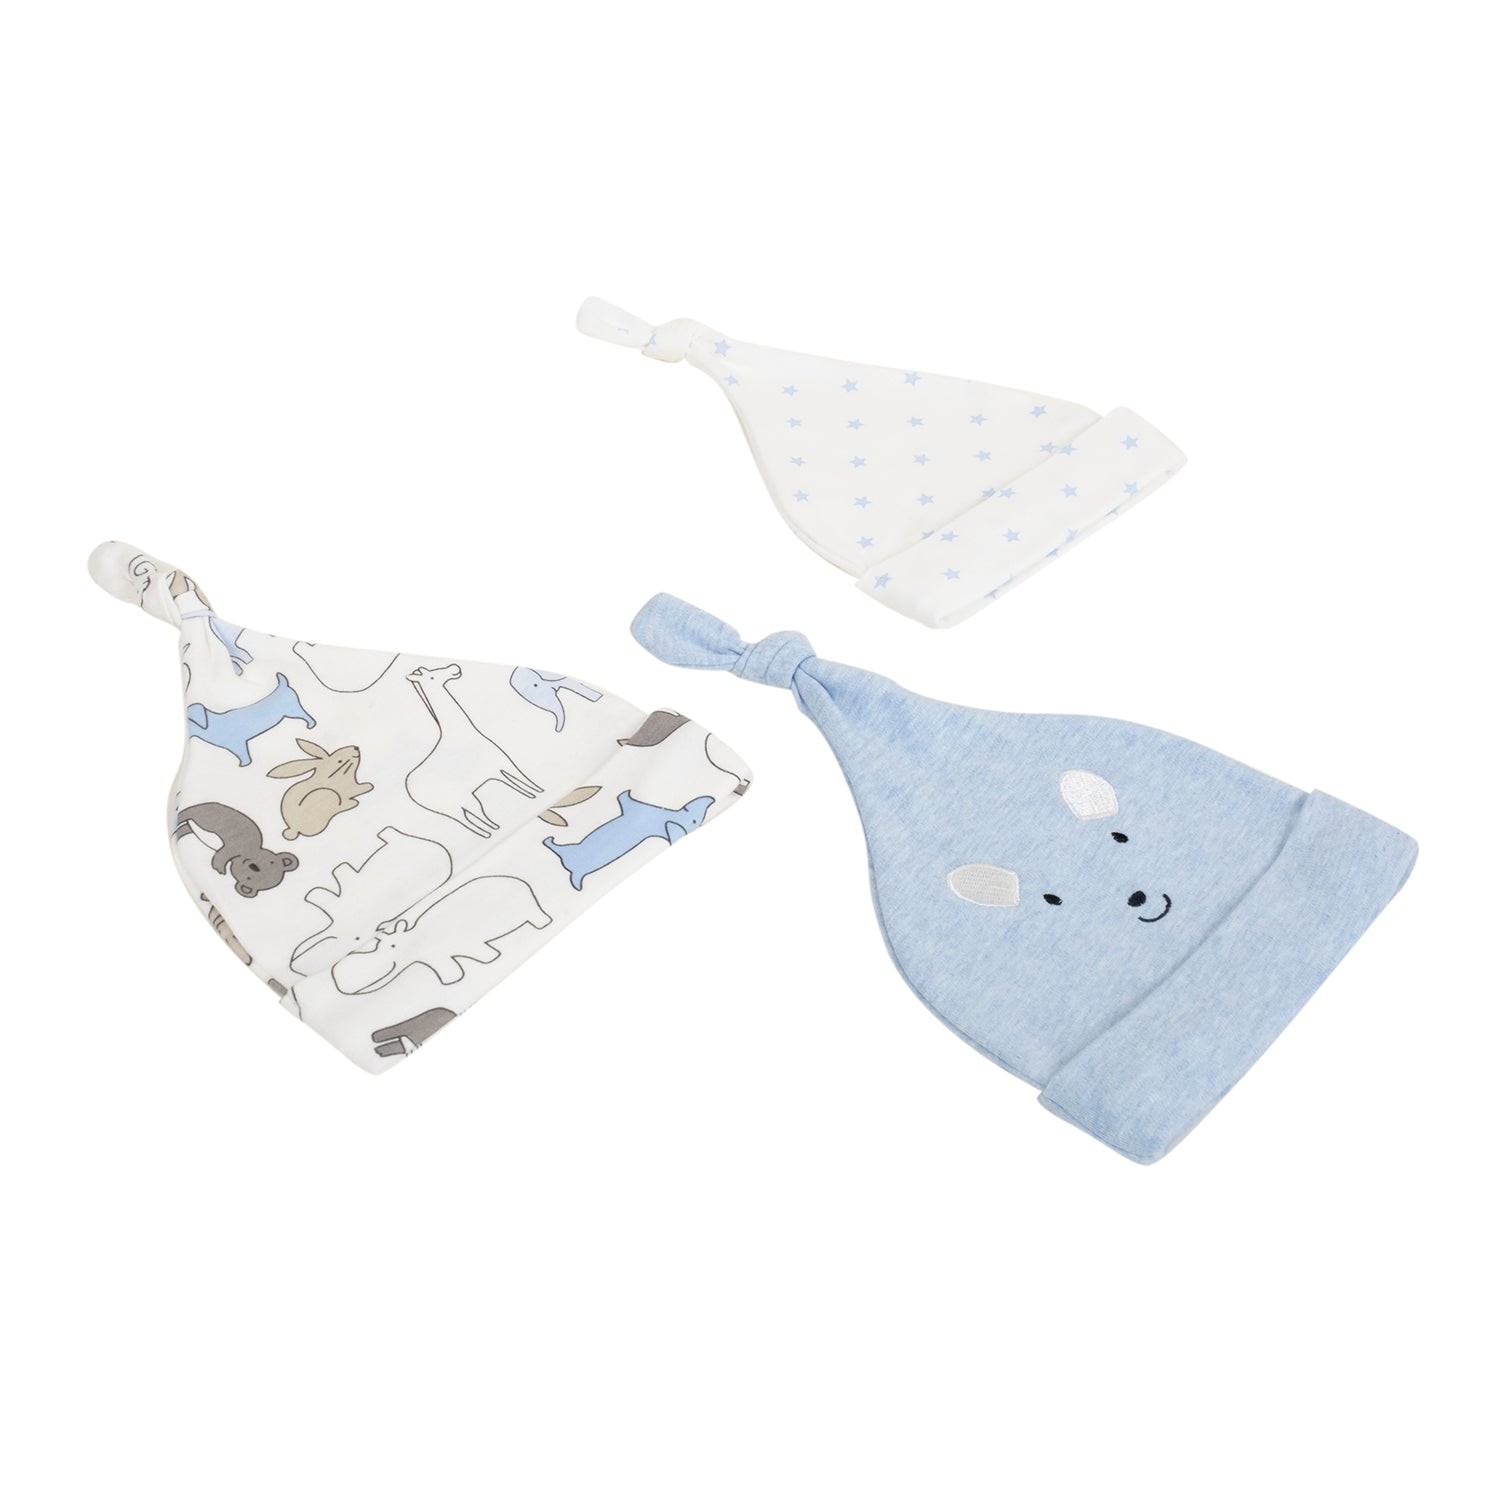 Baby Moo Animals Star Knotted Infants Ultra Soft 100% Cotton All Season Pack of 3 Caps - Cream